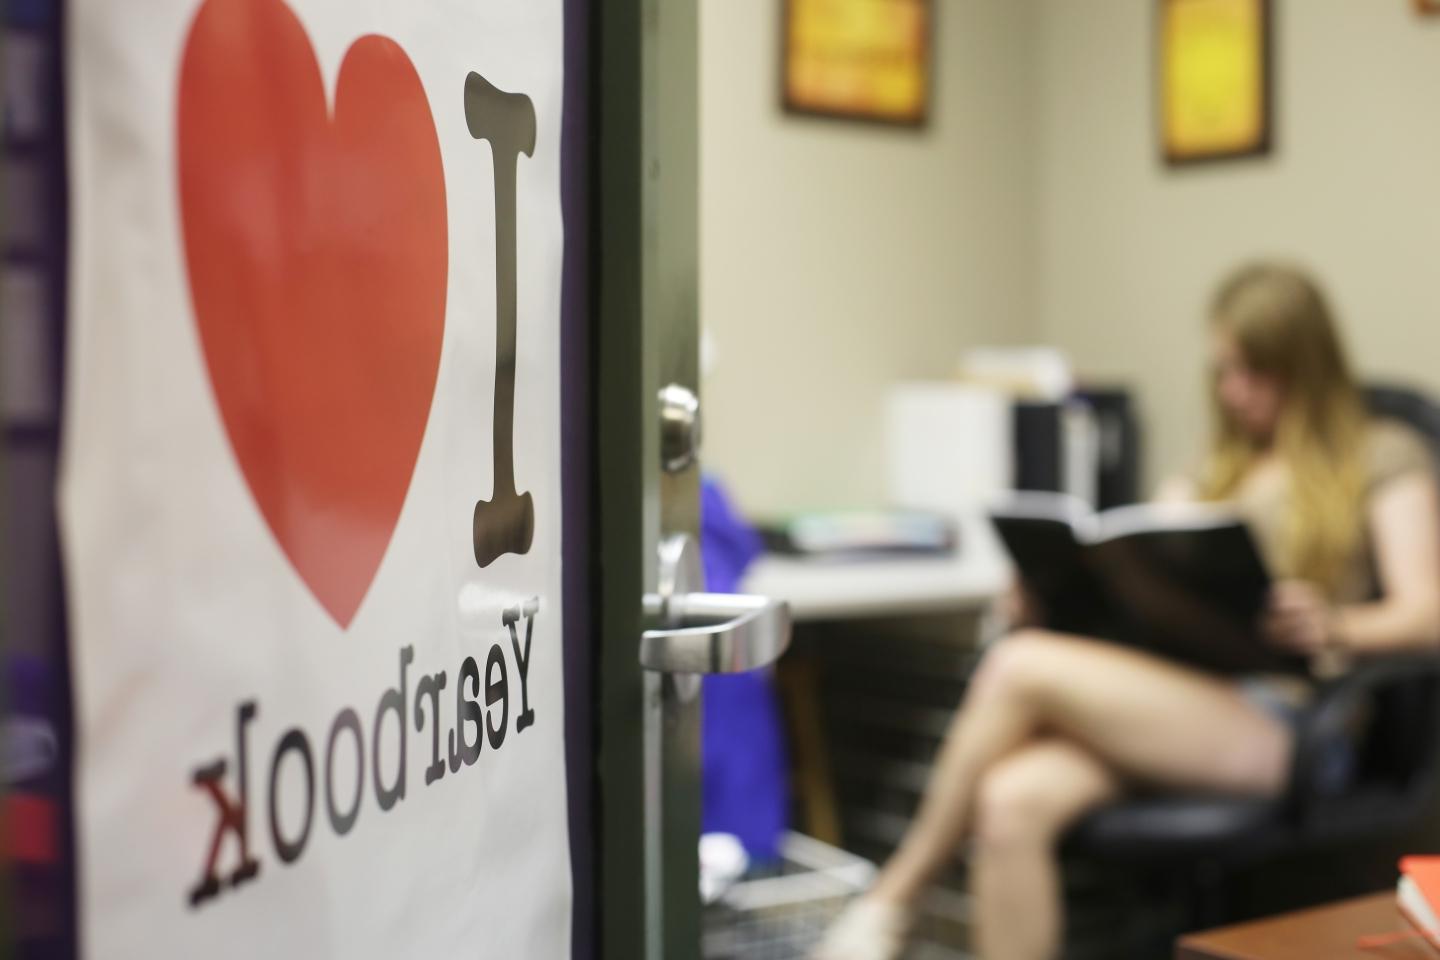 a sign on an open office door reads "I Heart Yearbook"